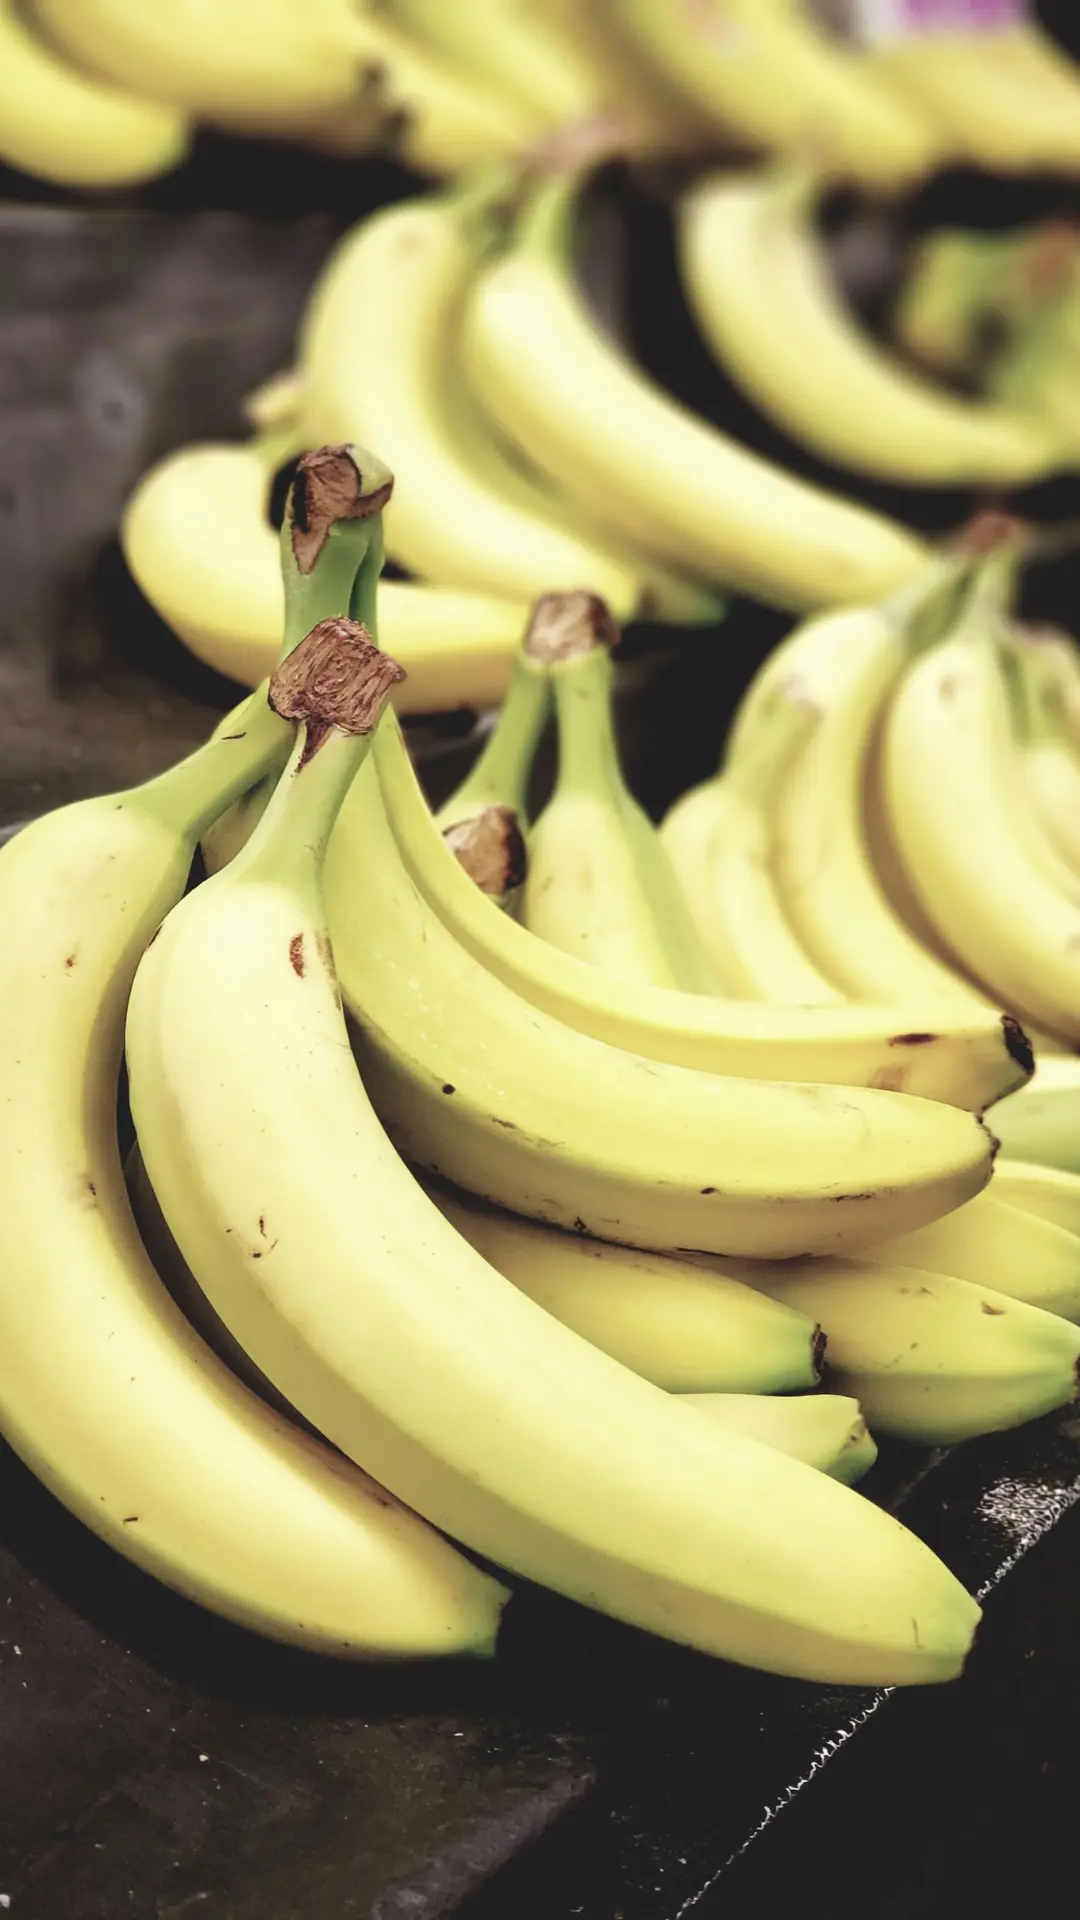 Top 5 Energy-Boosting Foods to Power Your Workouts